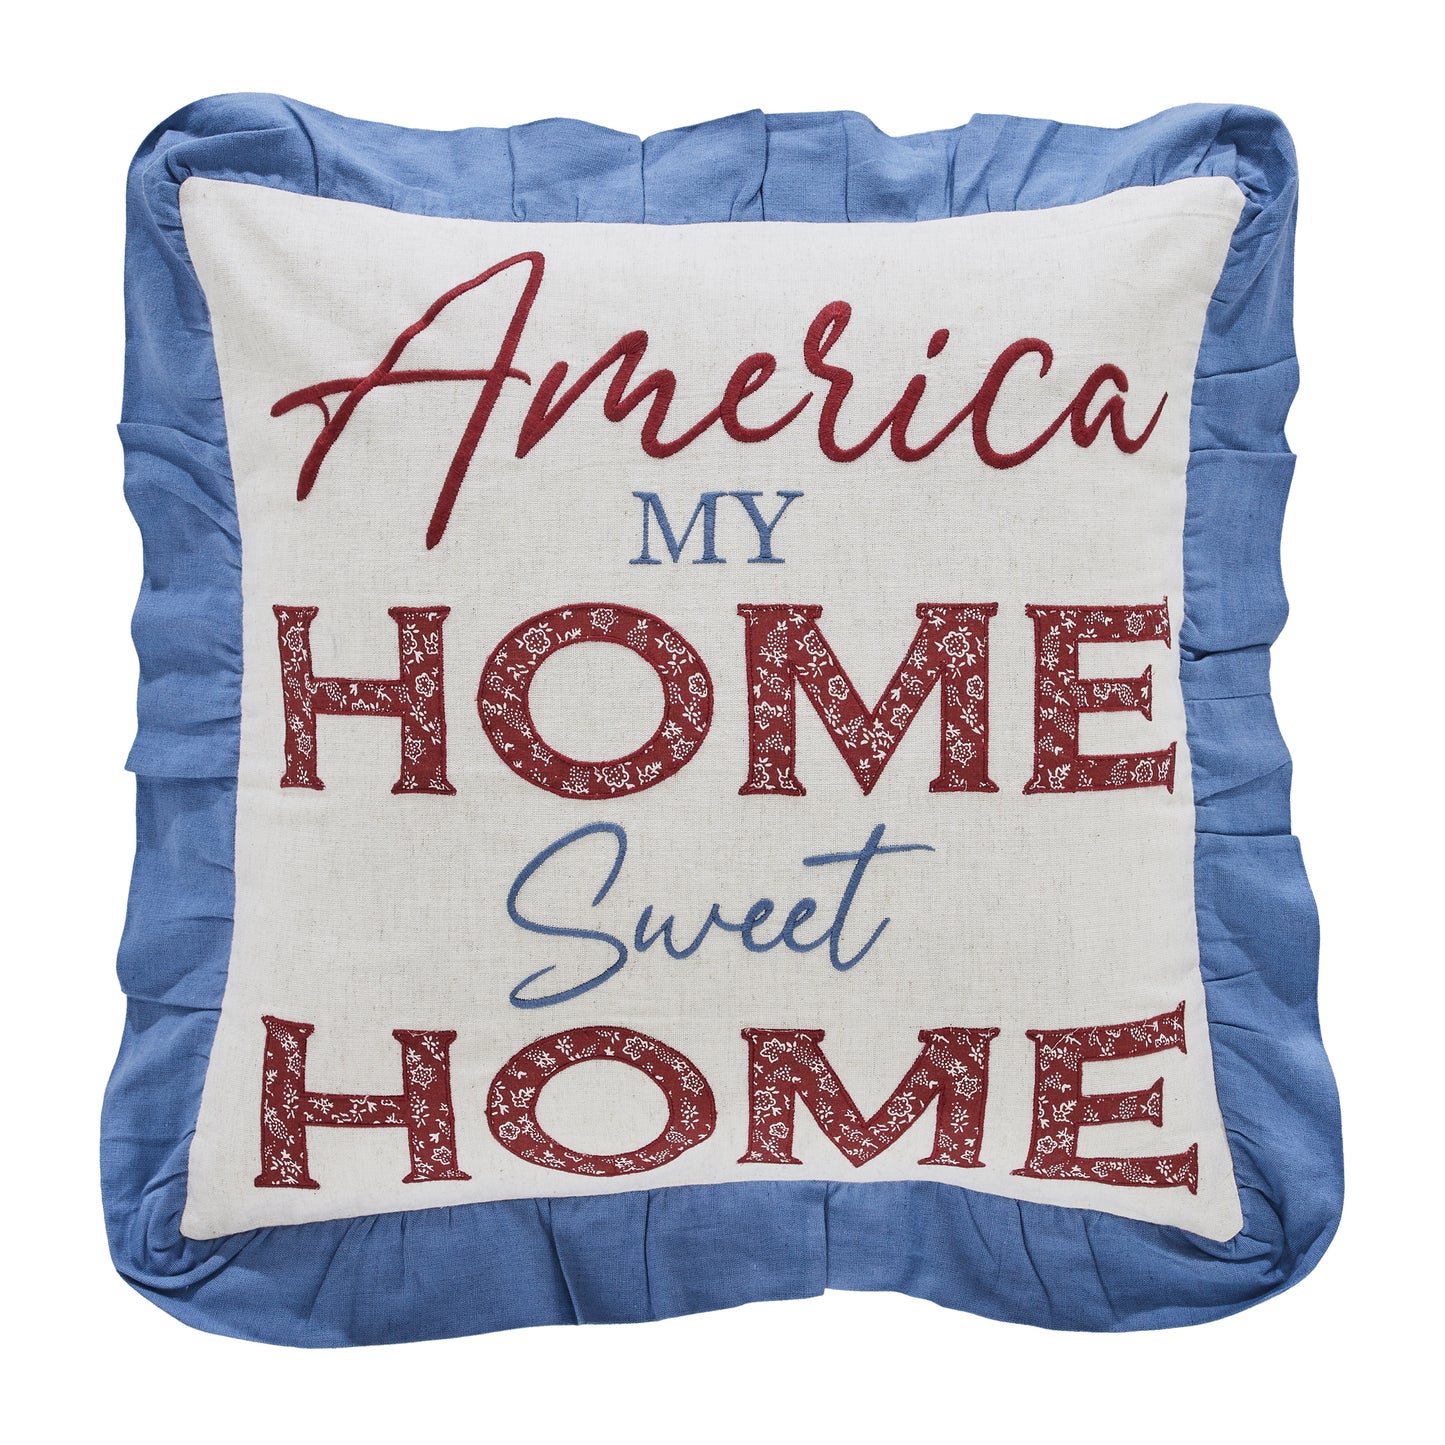 81178-Celebration-Home-Sweet-Home-Pillow-18x18-image-4